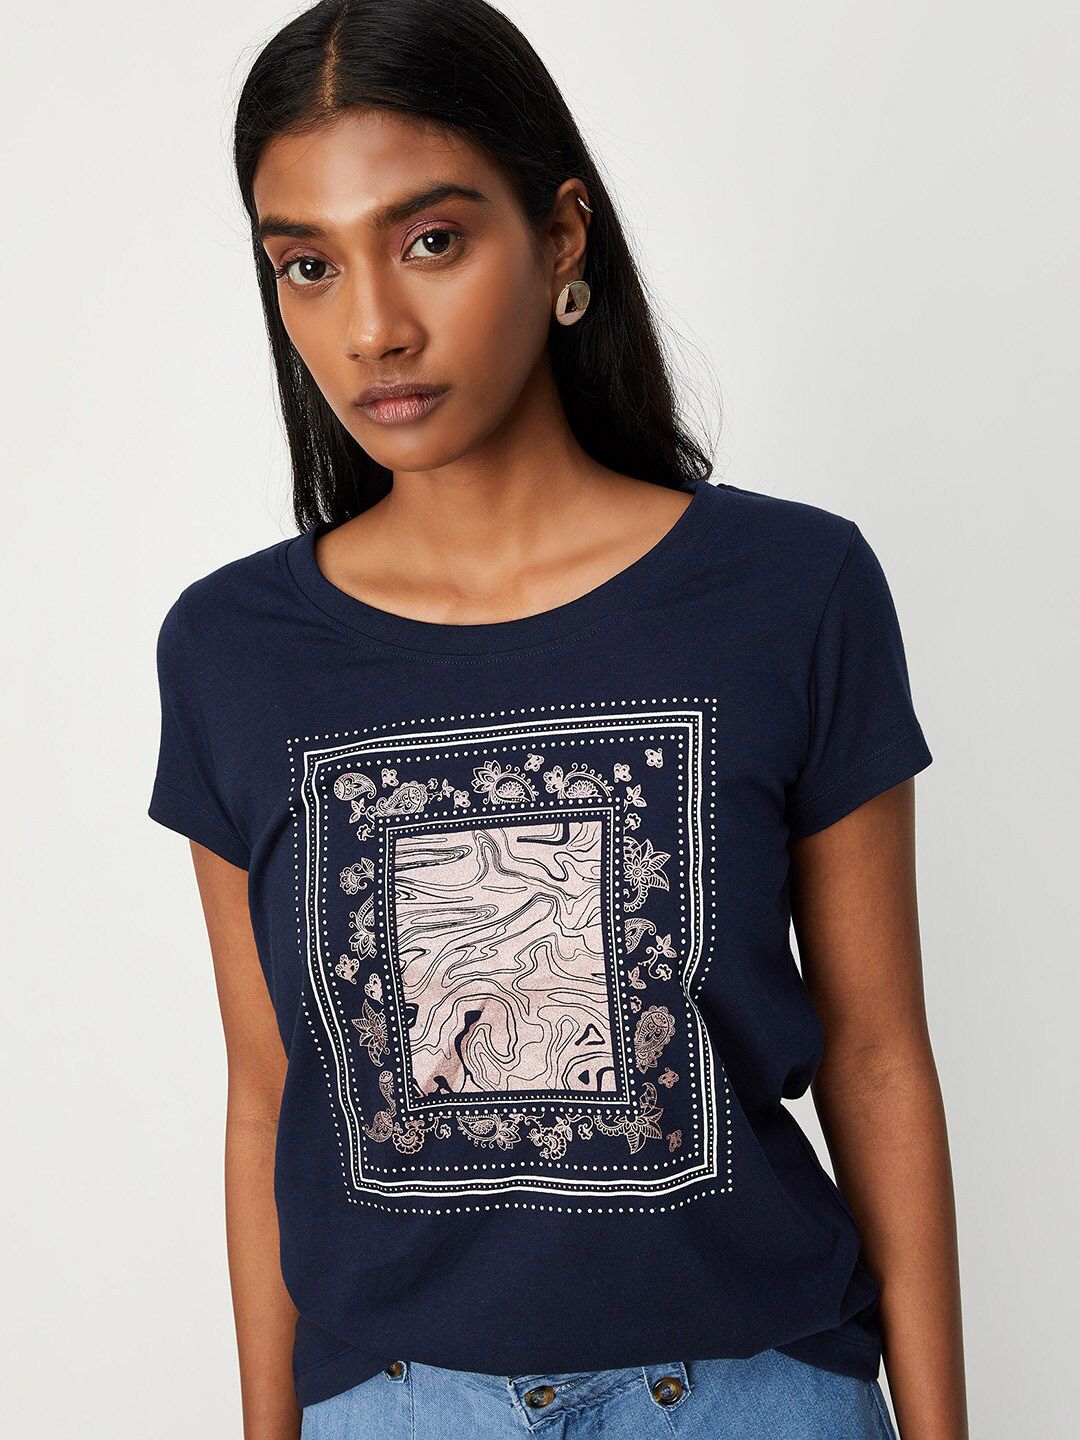 max Women Printed Cotton T-shirt Price in India